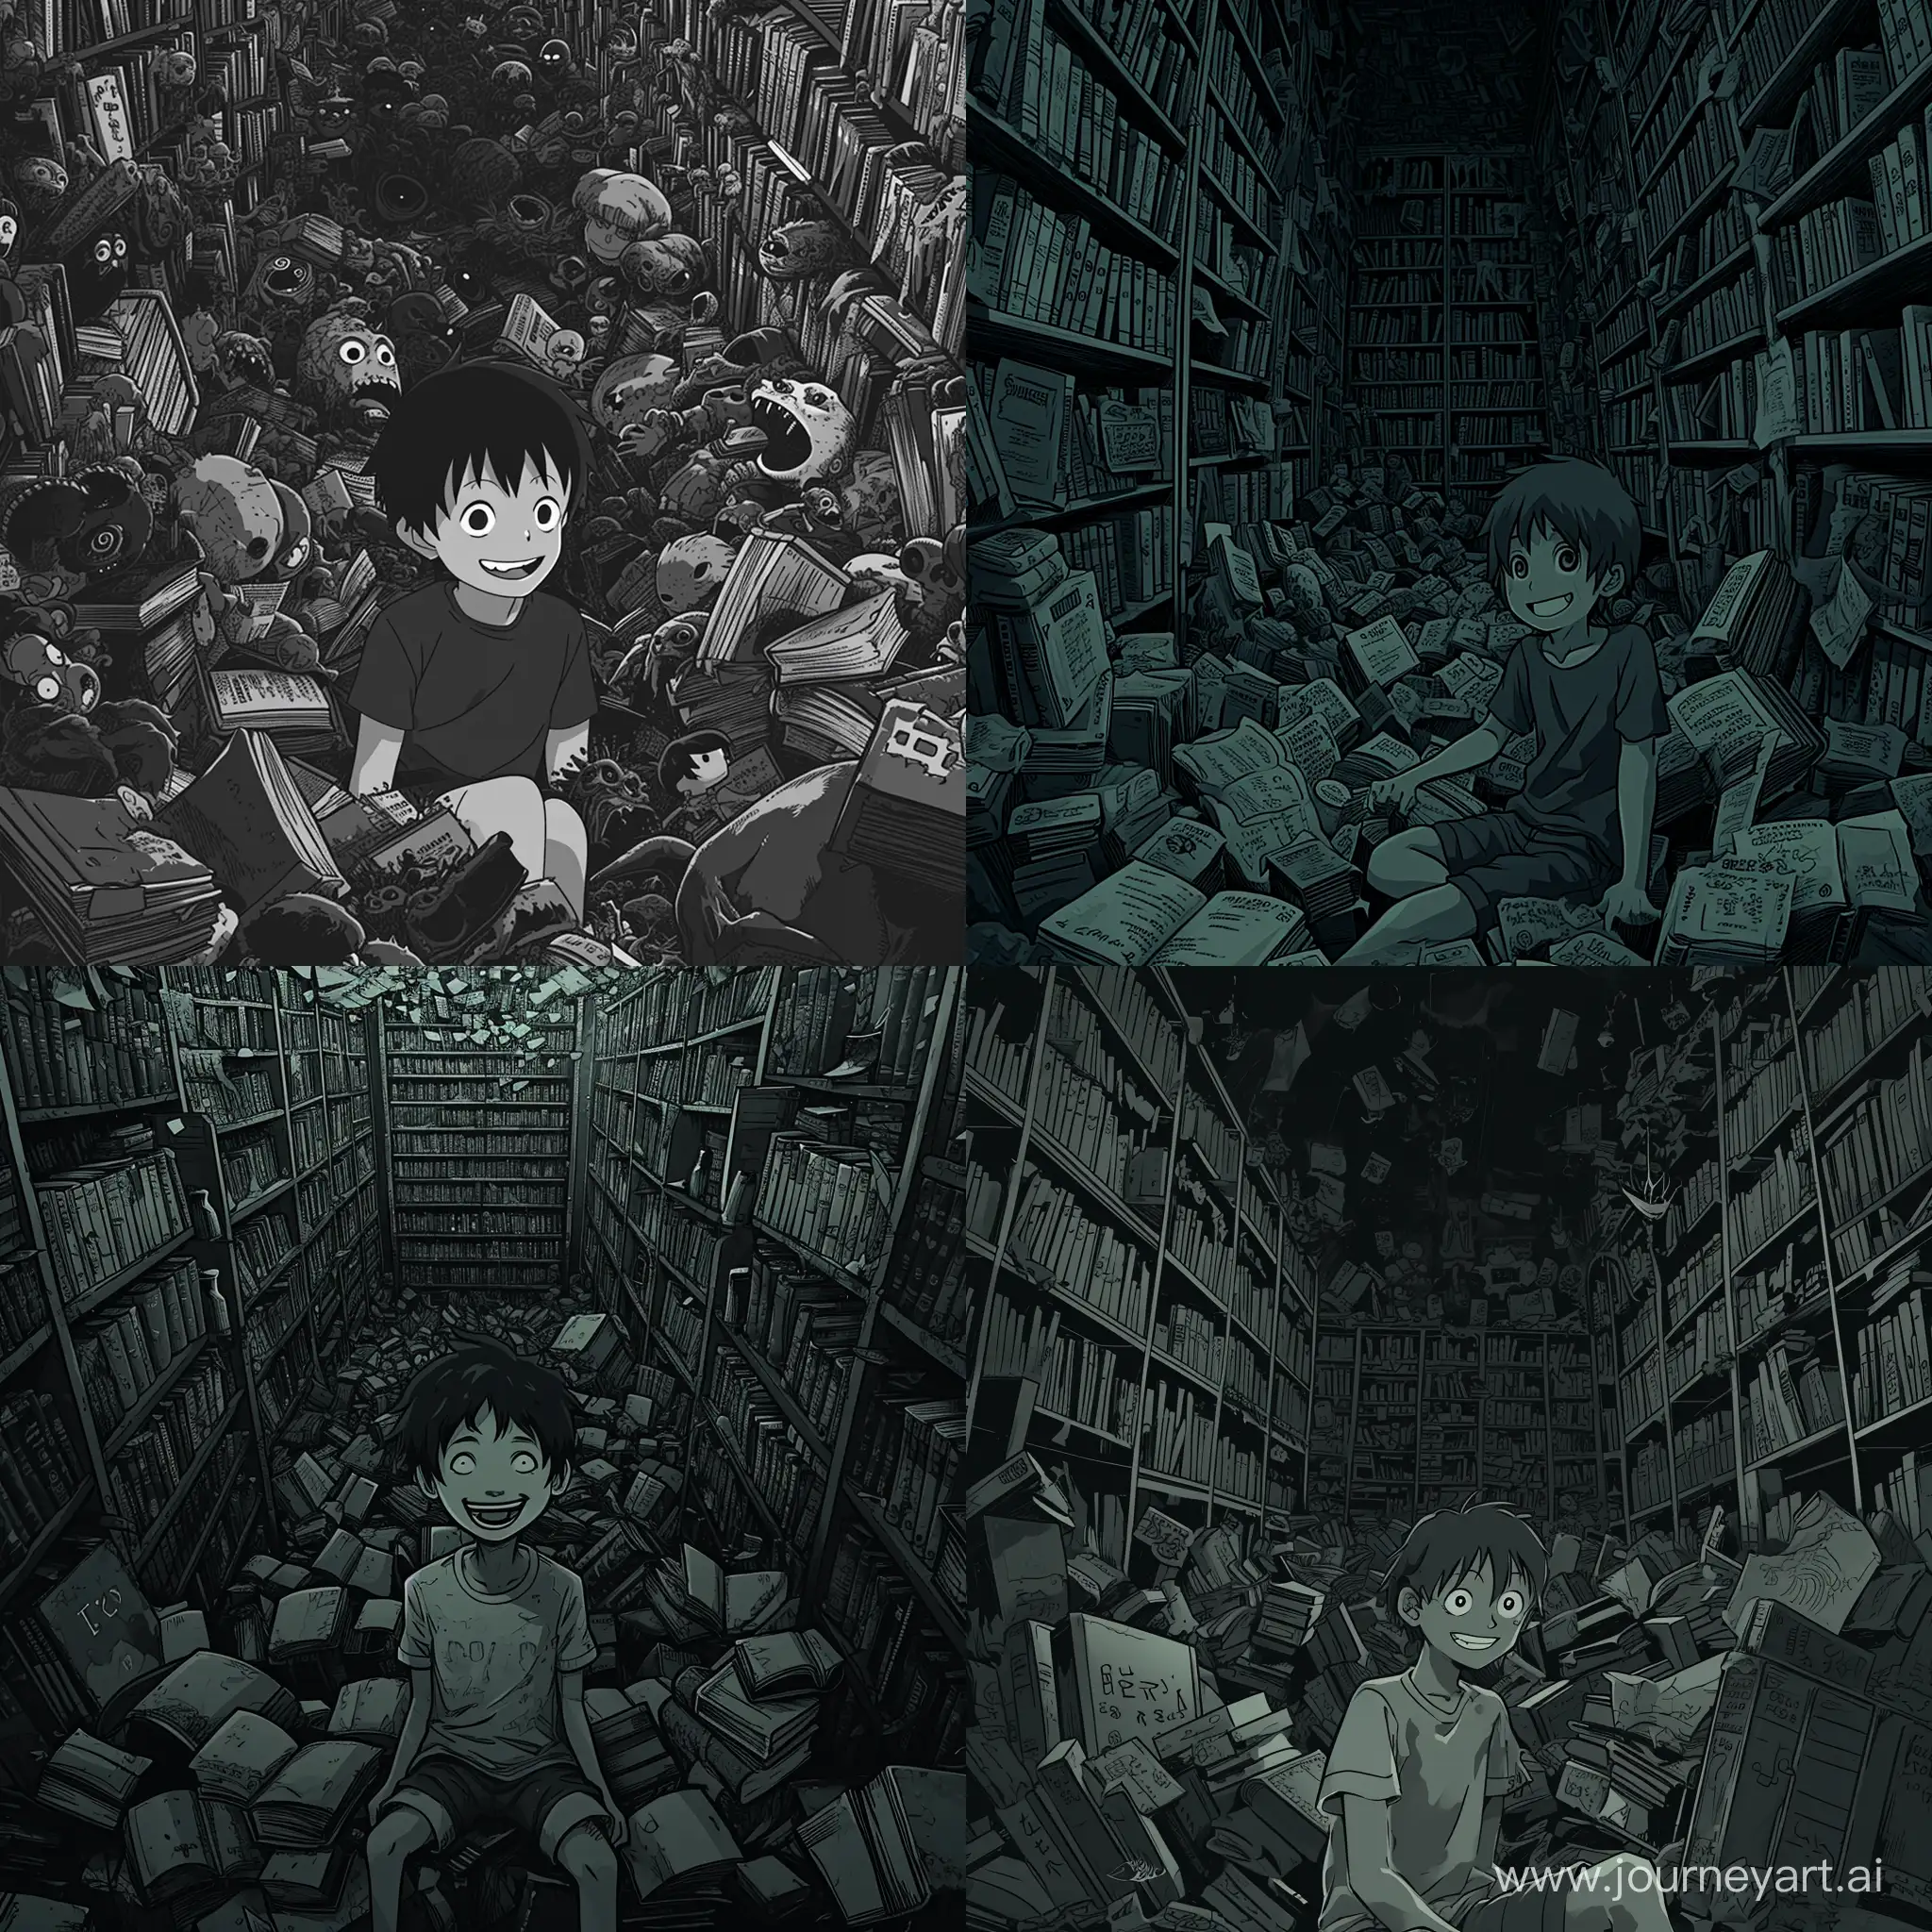 in a dark and eerie anime style reminiscent of Junji Ito's works a boy with an smile sits amidst a surreal library of bizarre, eldritch books. The color temperature is a chilling monochromatic grayscale